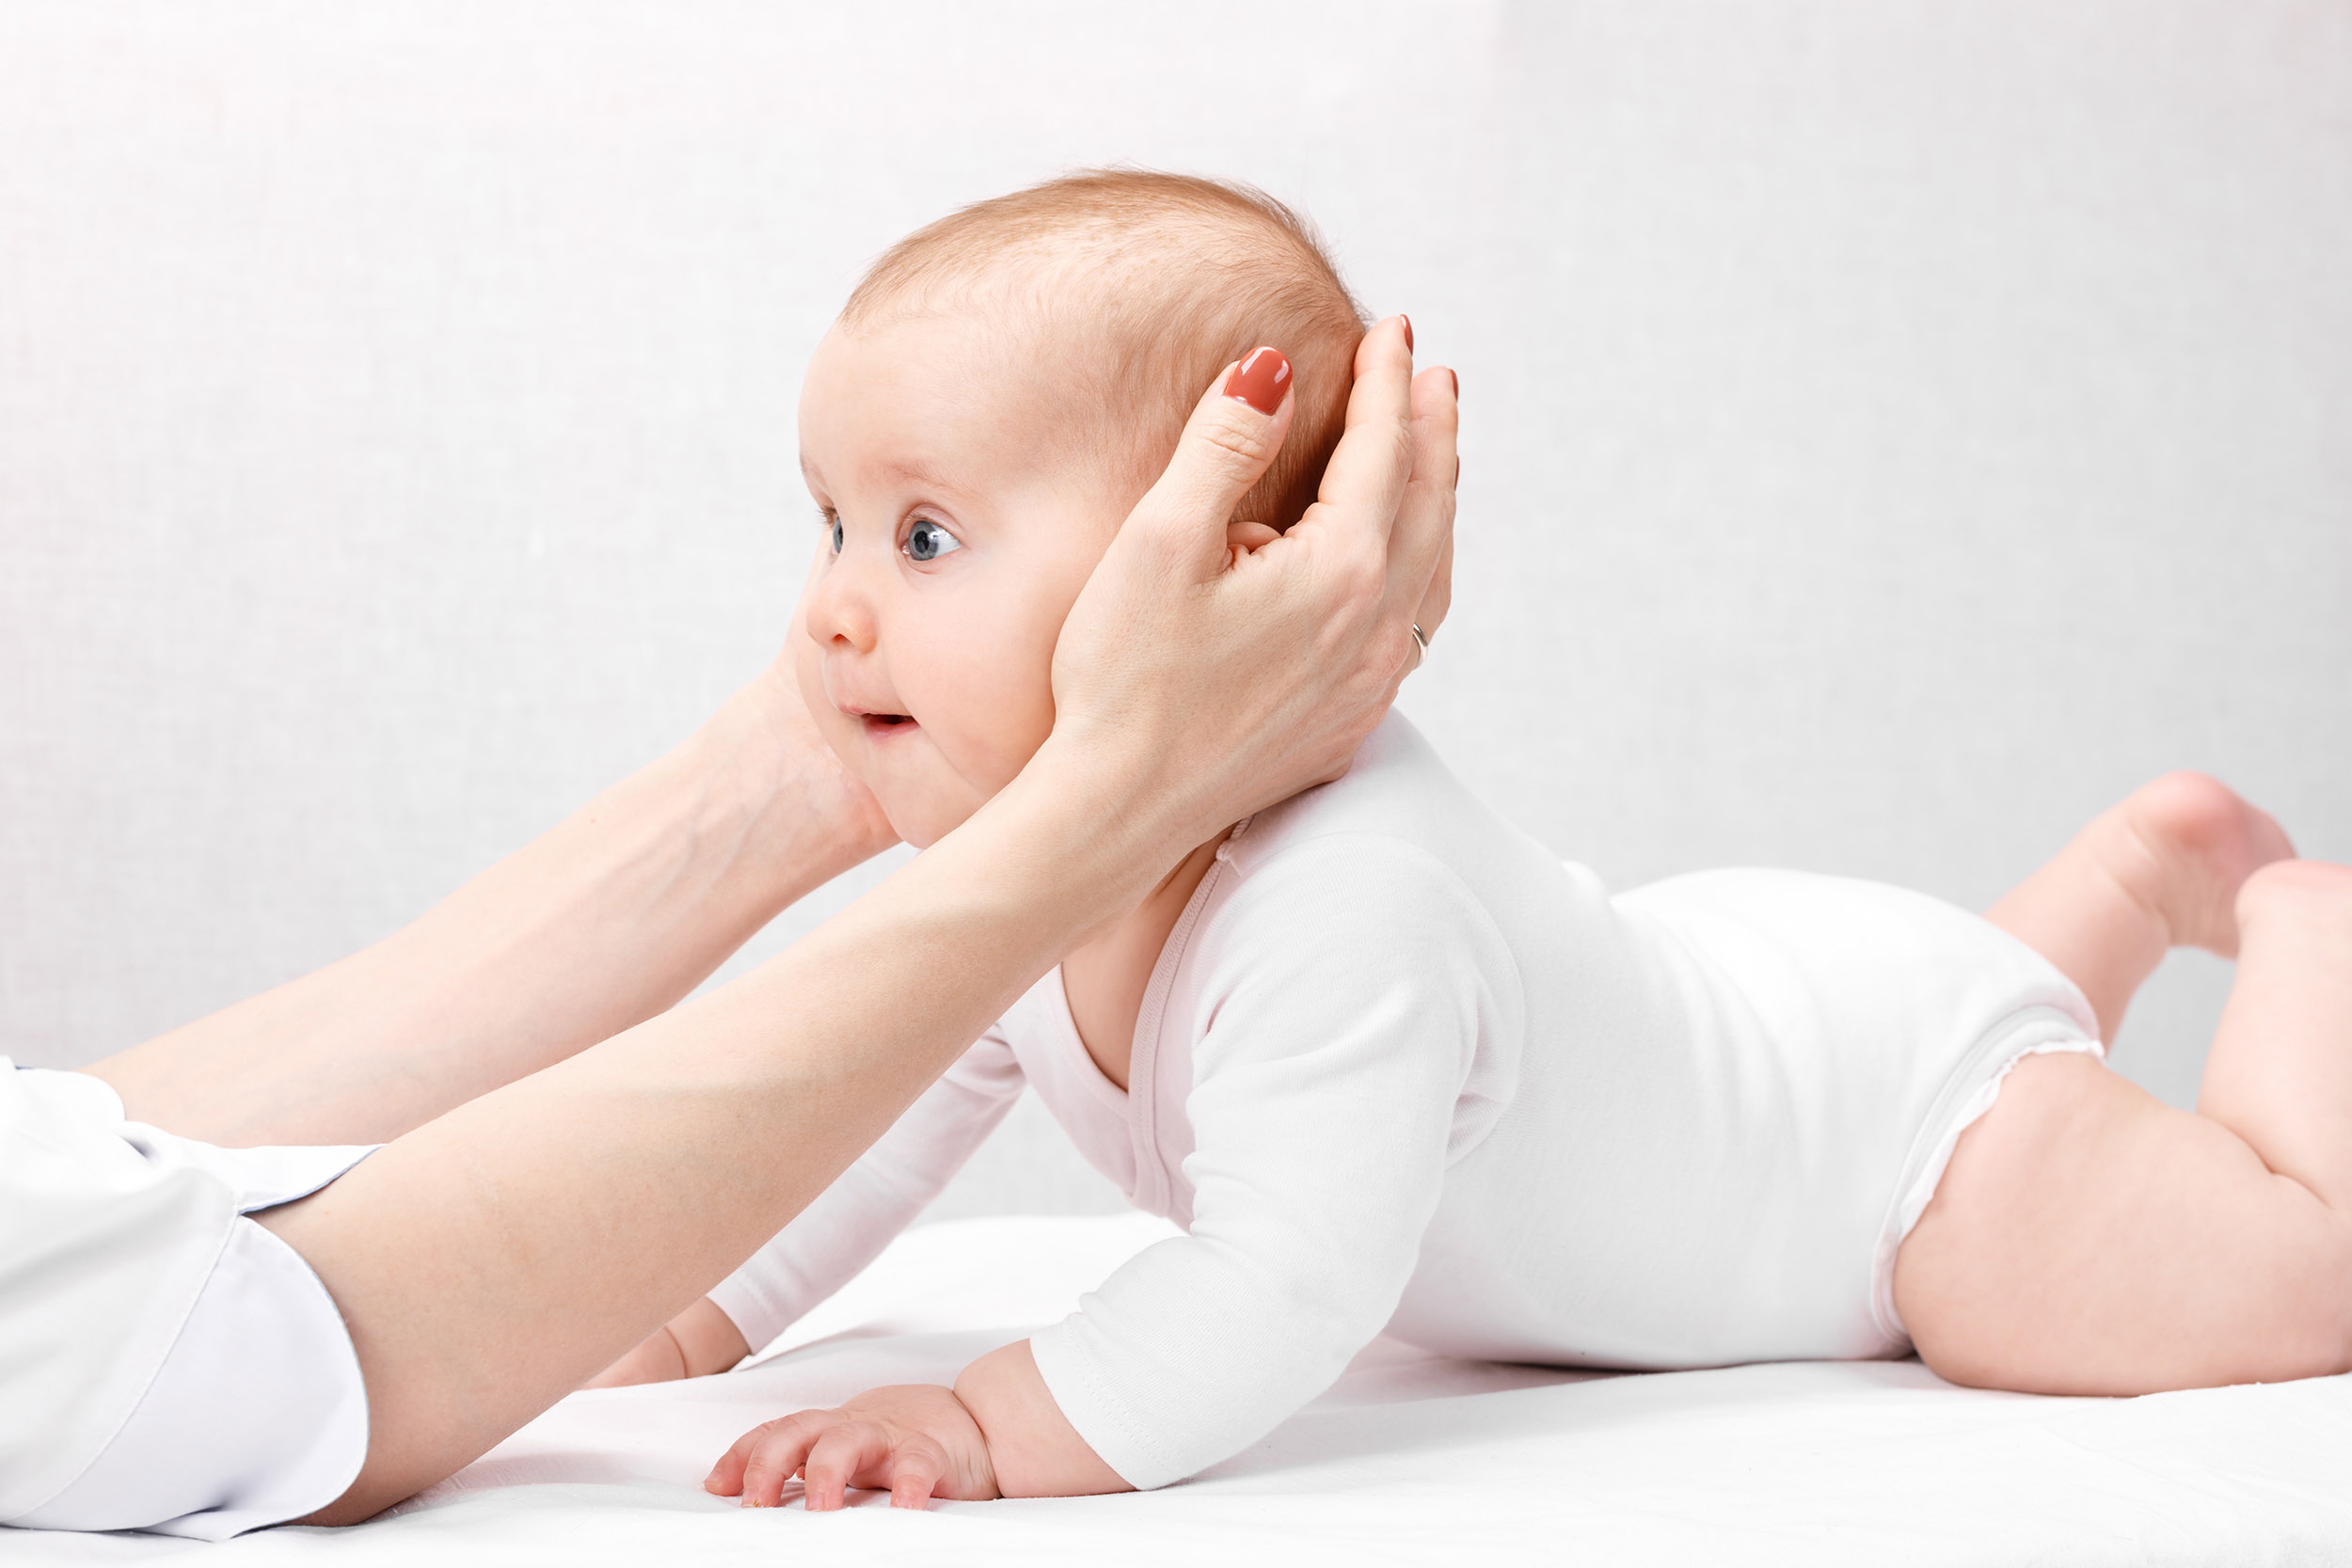 baby receiving alternative flat head syndrome treatment for torticollis and plagiocephaly